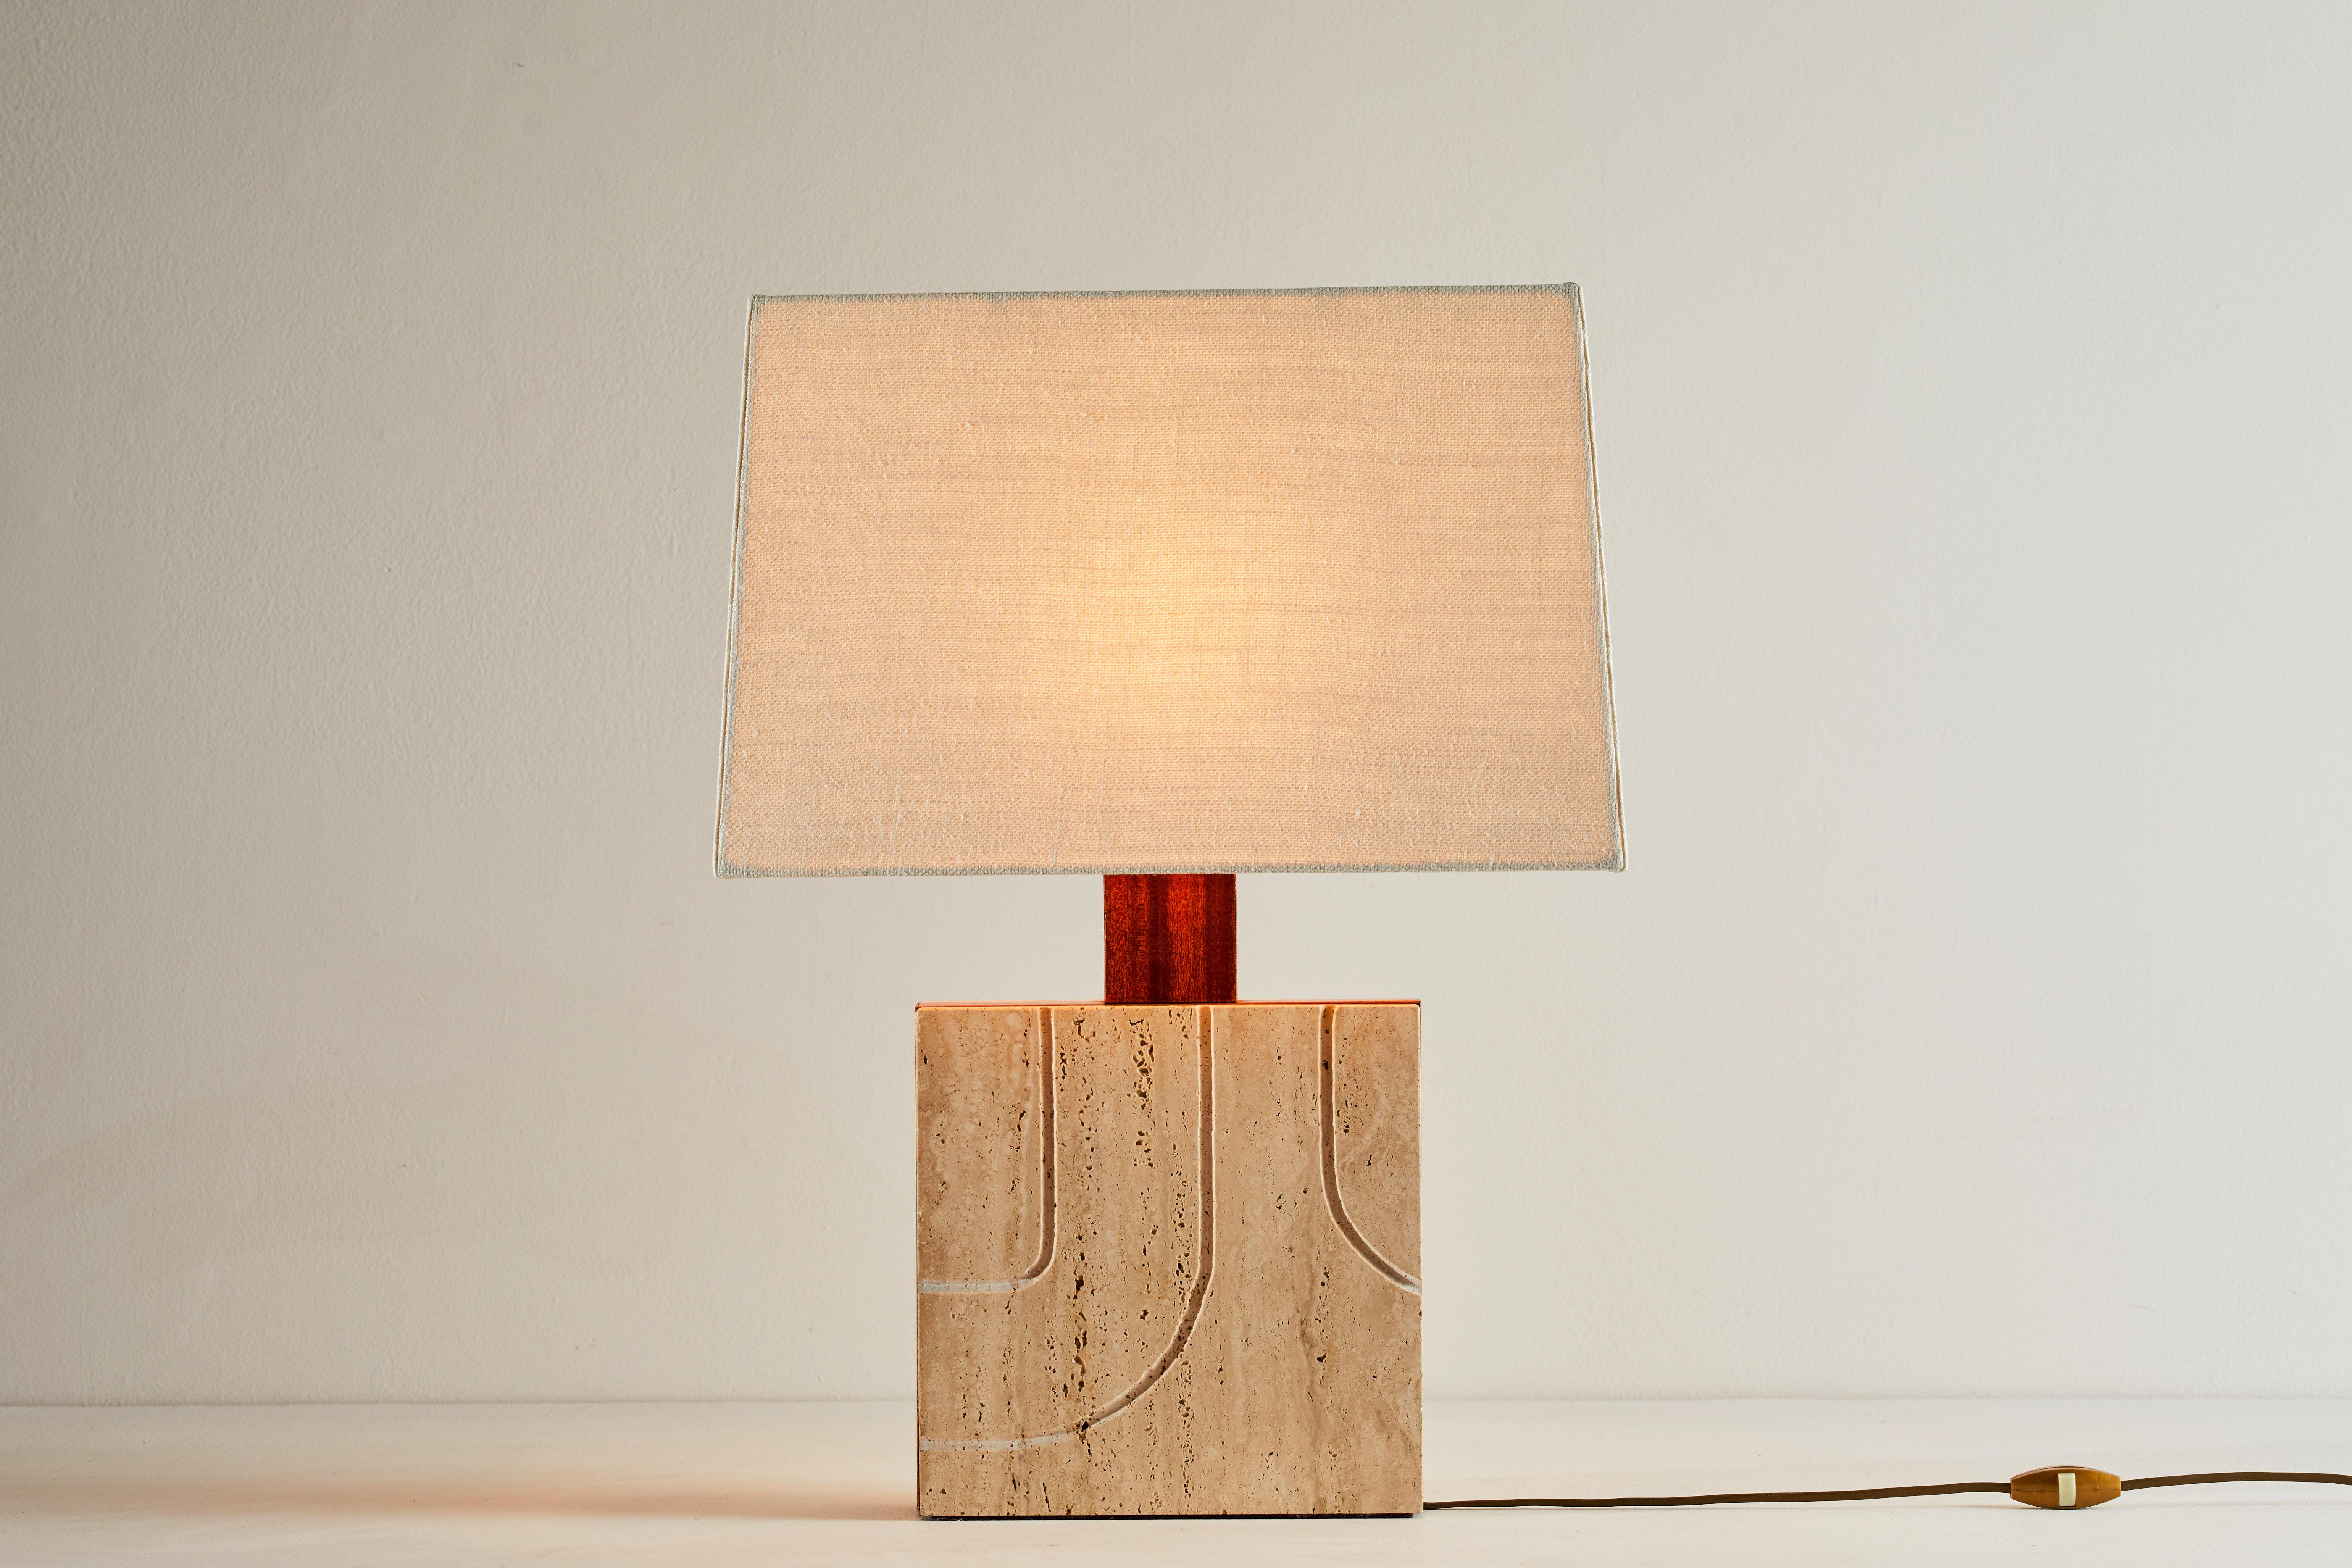 Travertine table lamp. Manufactured in Italy, circa 1970s. Travertine base with teak inlay. Custom linen shade. Original cord. Takes one E27 40w maximum bulb. Bulbs provided as a one time courtesy.